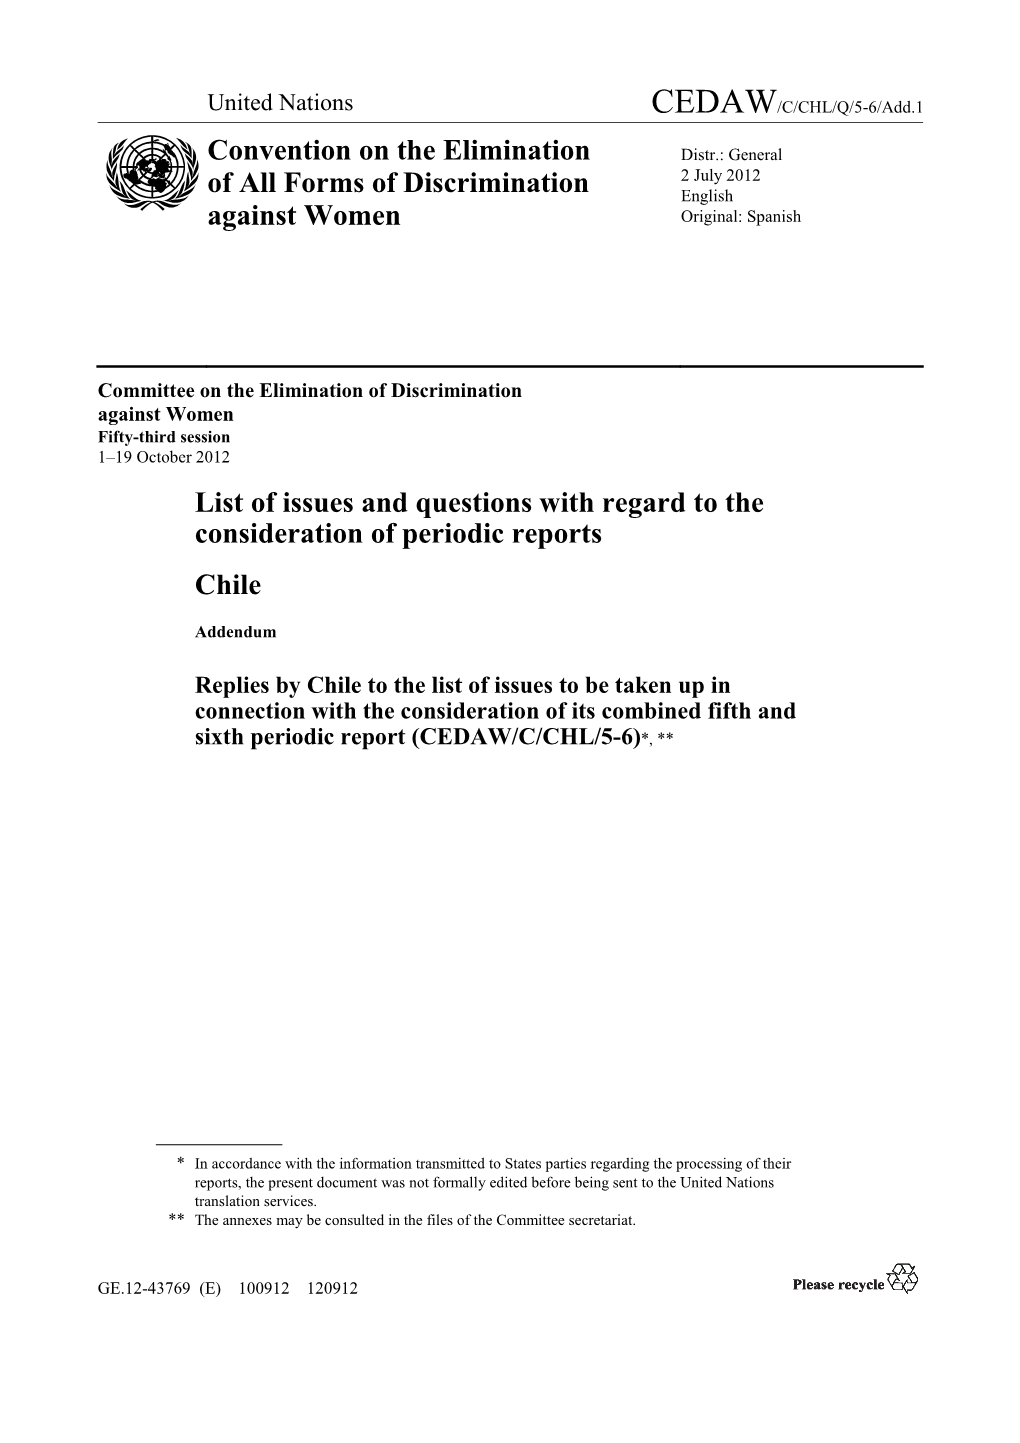 List of Issues and Questions with Regard to the Consideration of Periodic Reports Chile